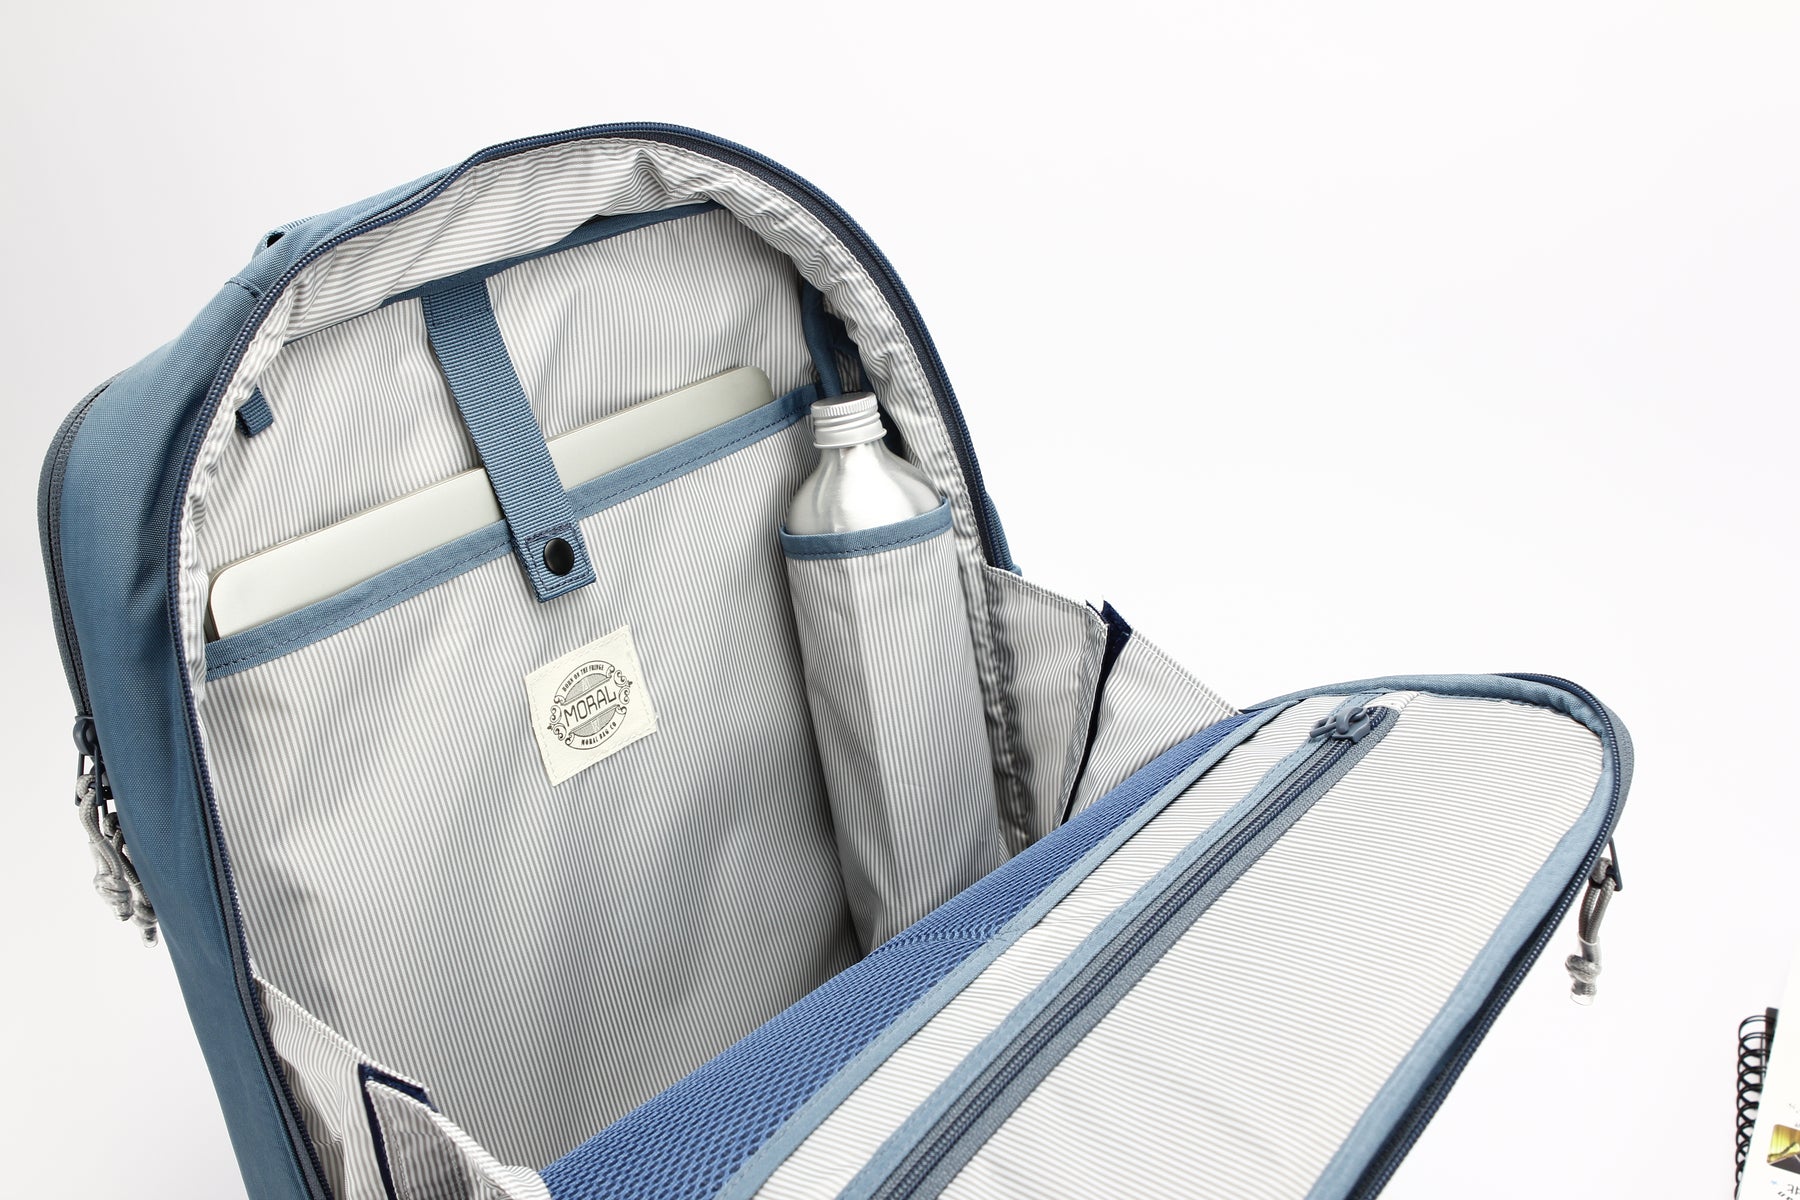 Union Convertible Backpack - Moralbags